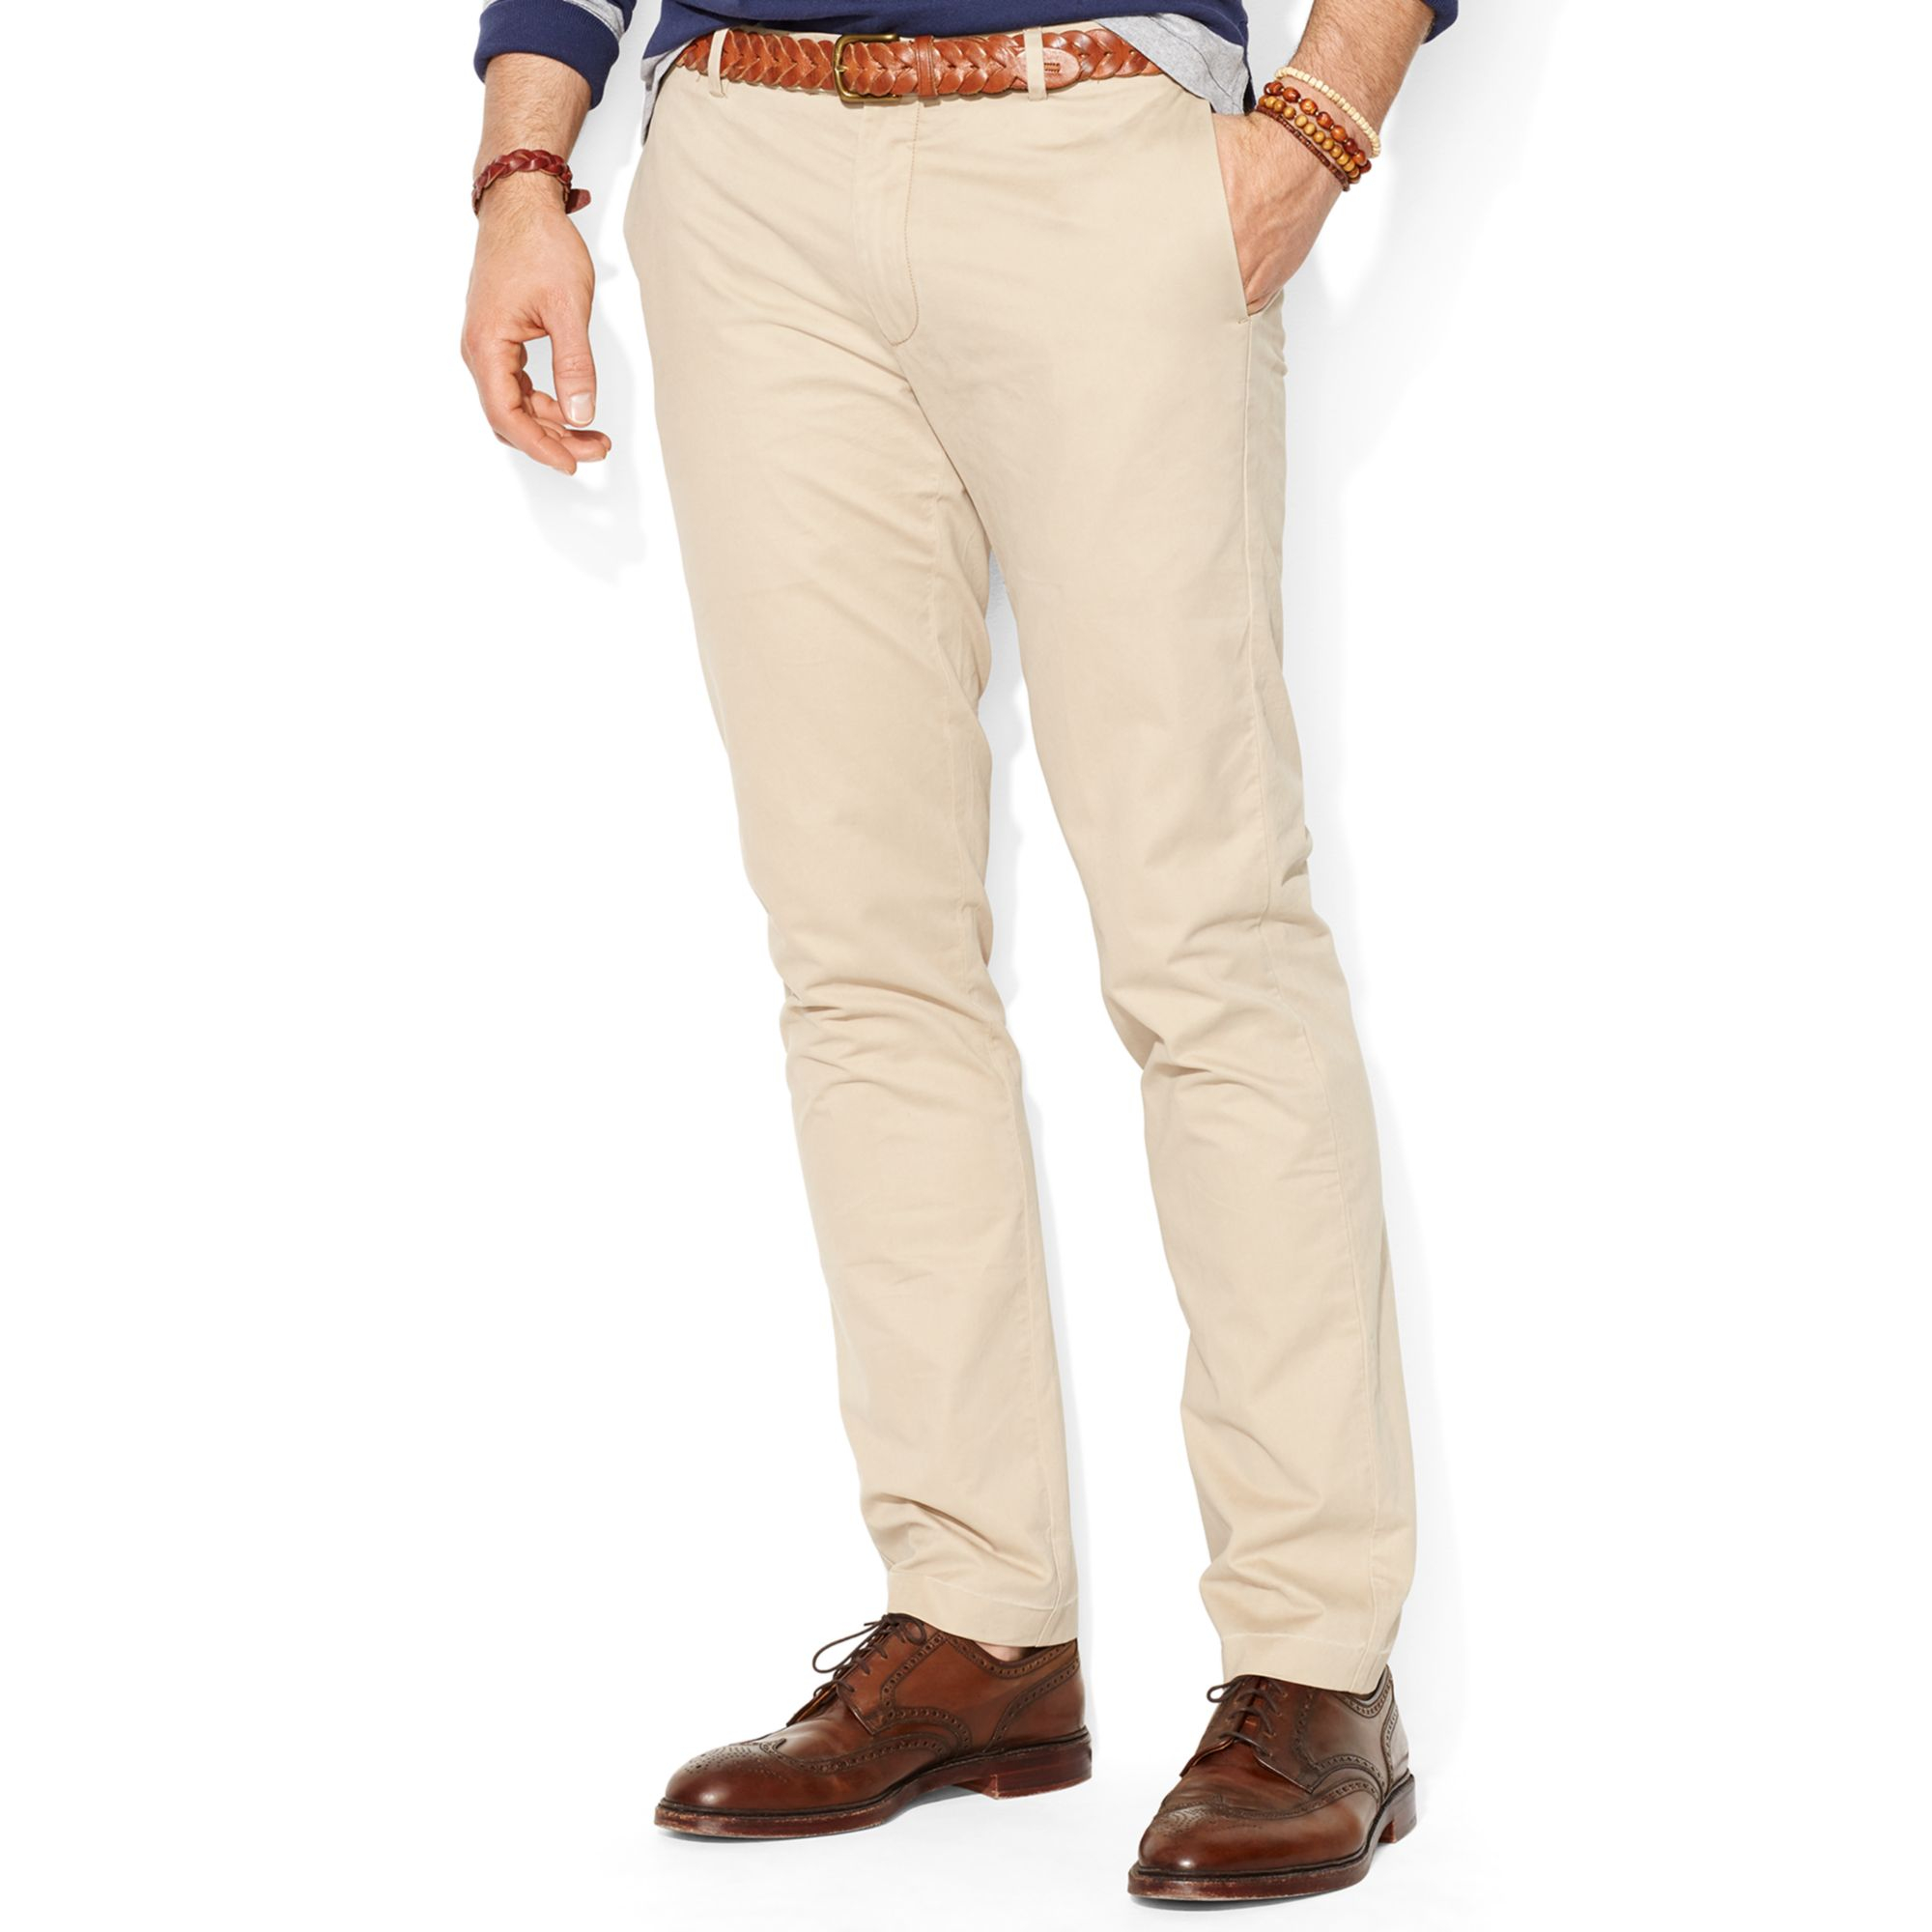 Polo ralph lauren Big And Tall Laundered Chino Pants in Khaki for Men ...